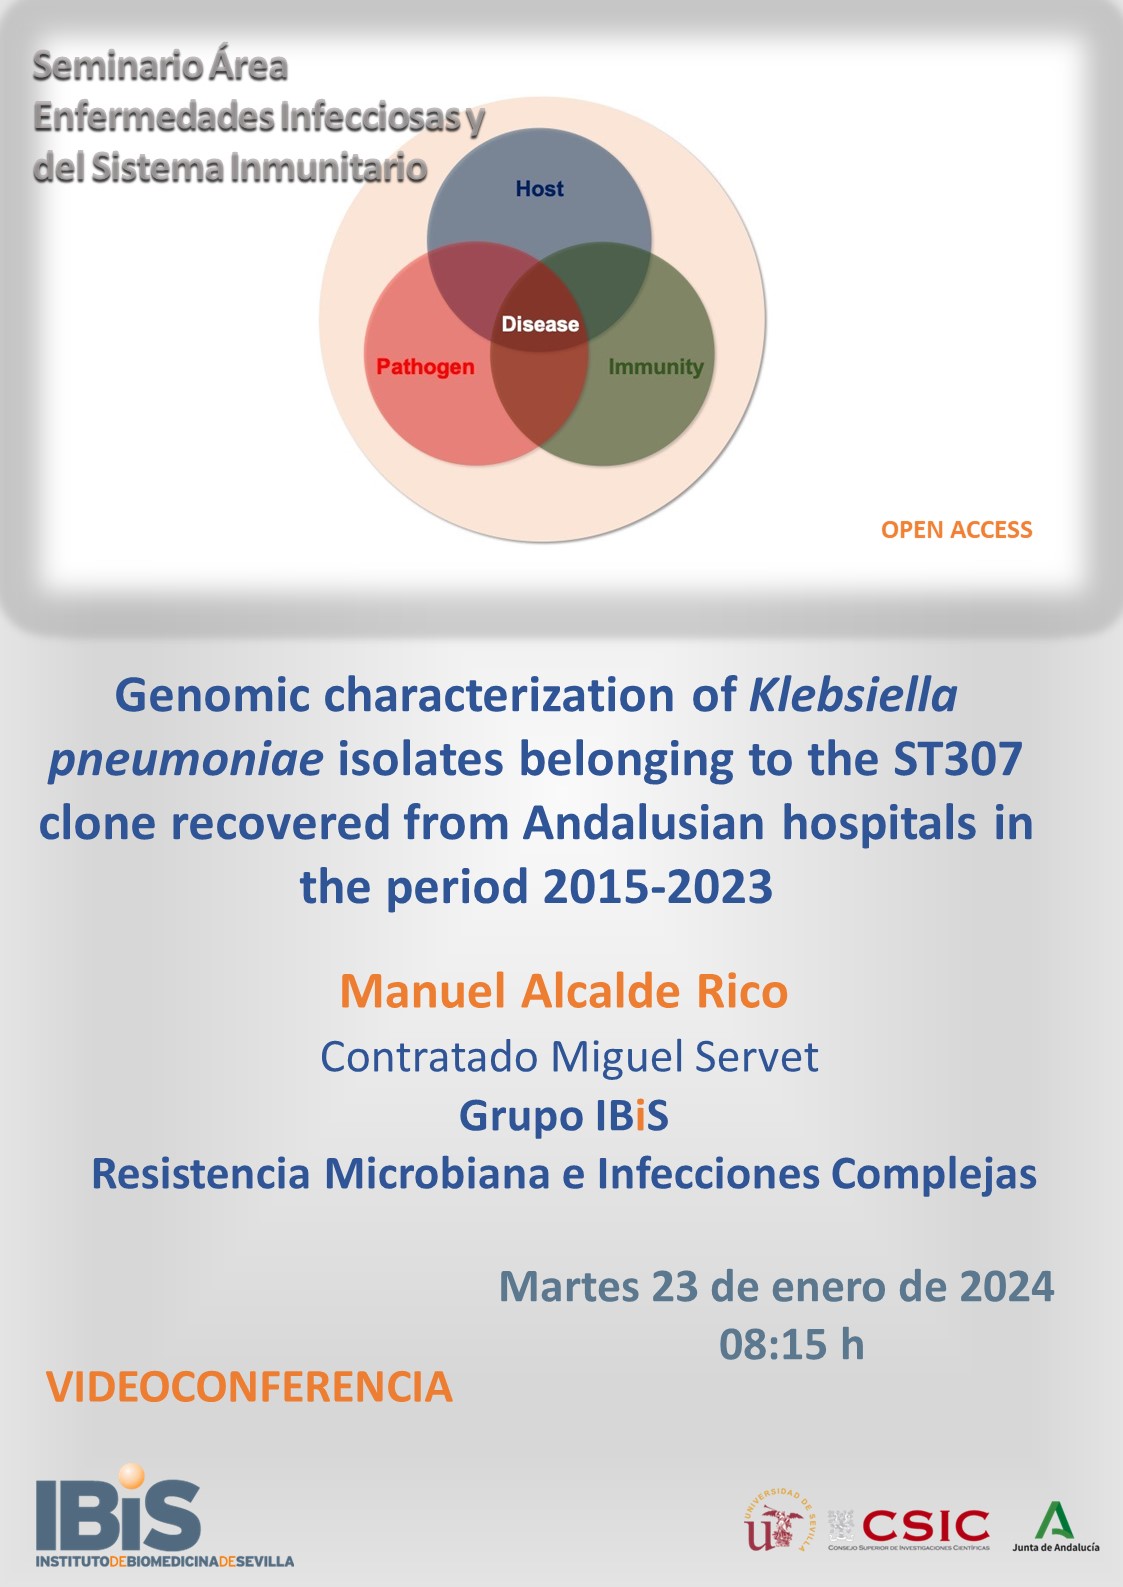 Poster: Genomic characterization of *Klebsiella pneumoniae* isolates belonging to the ST307 clone recovered from Andalusian hospitals in the period 2015-2023